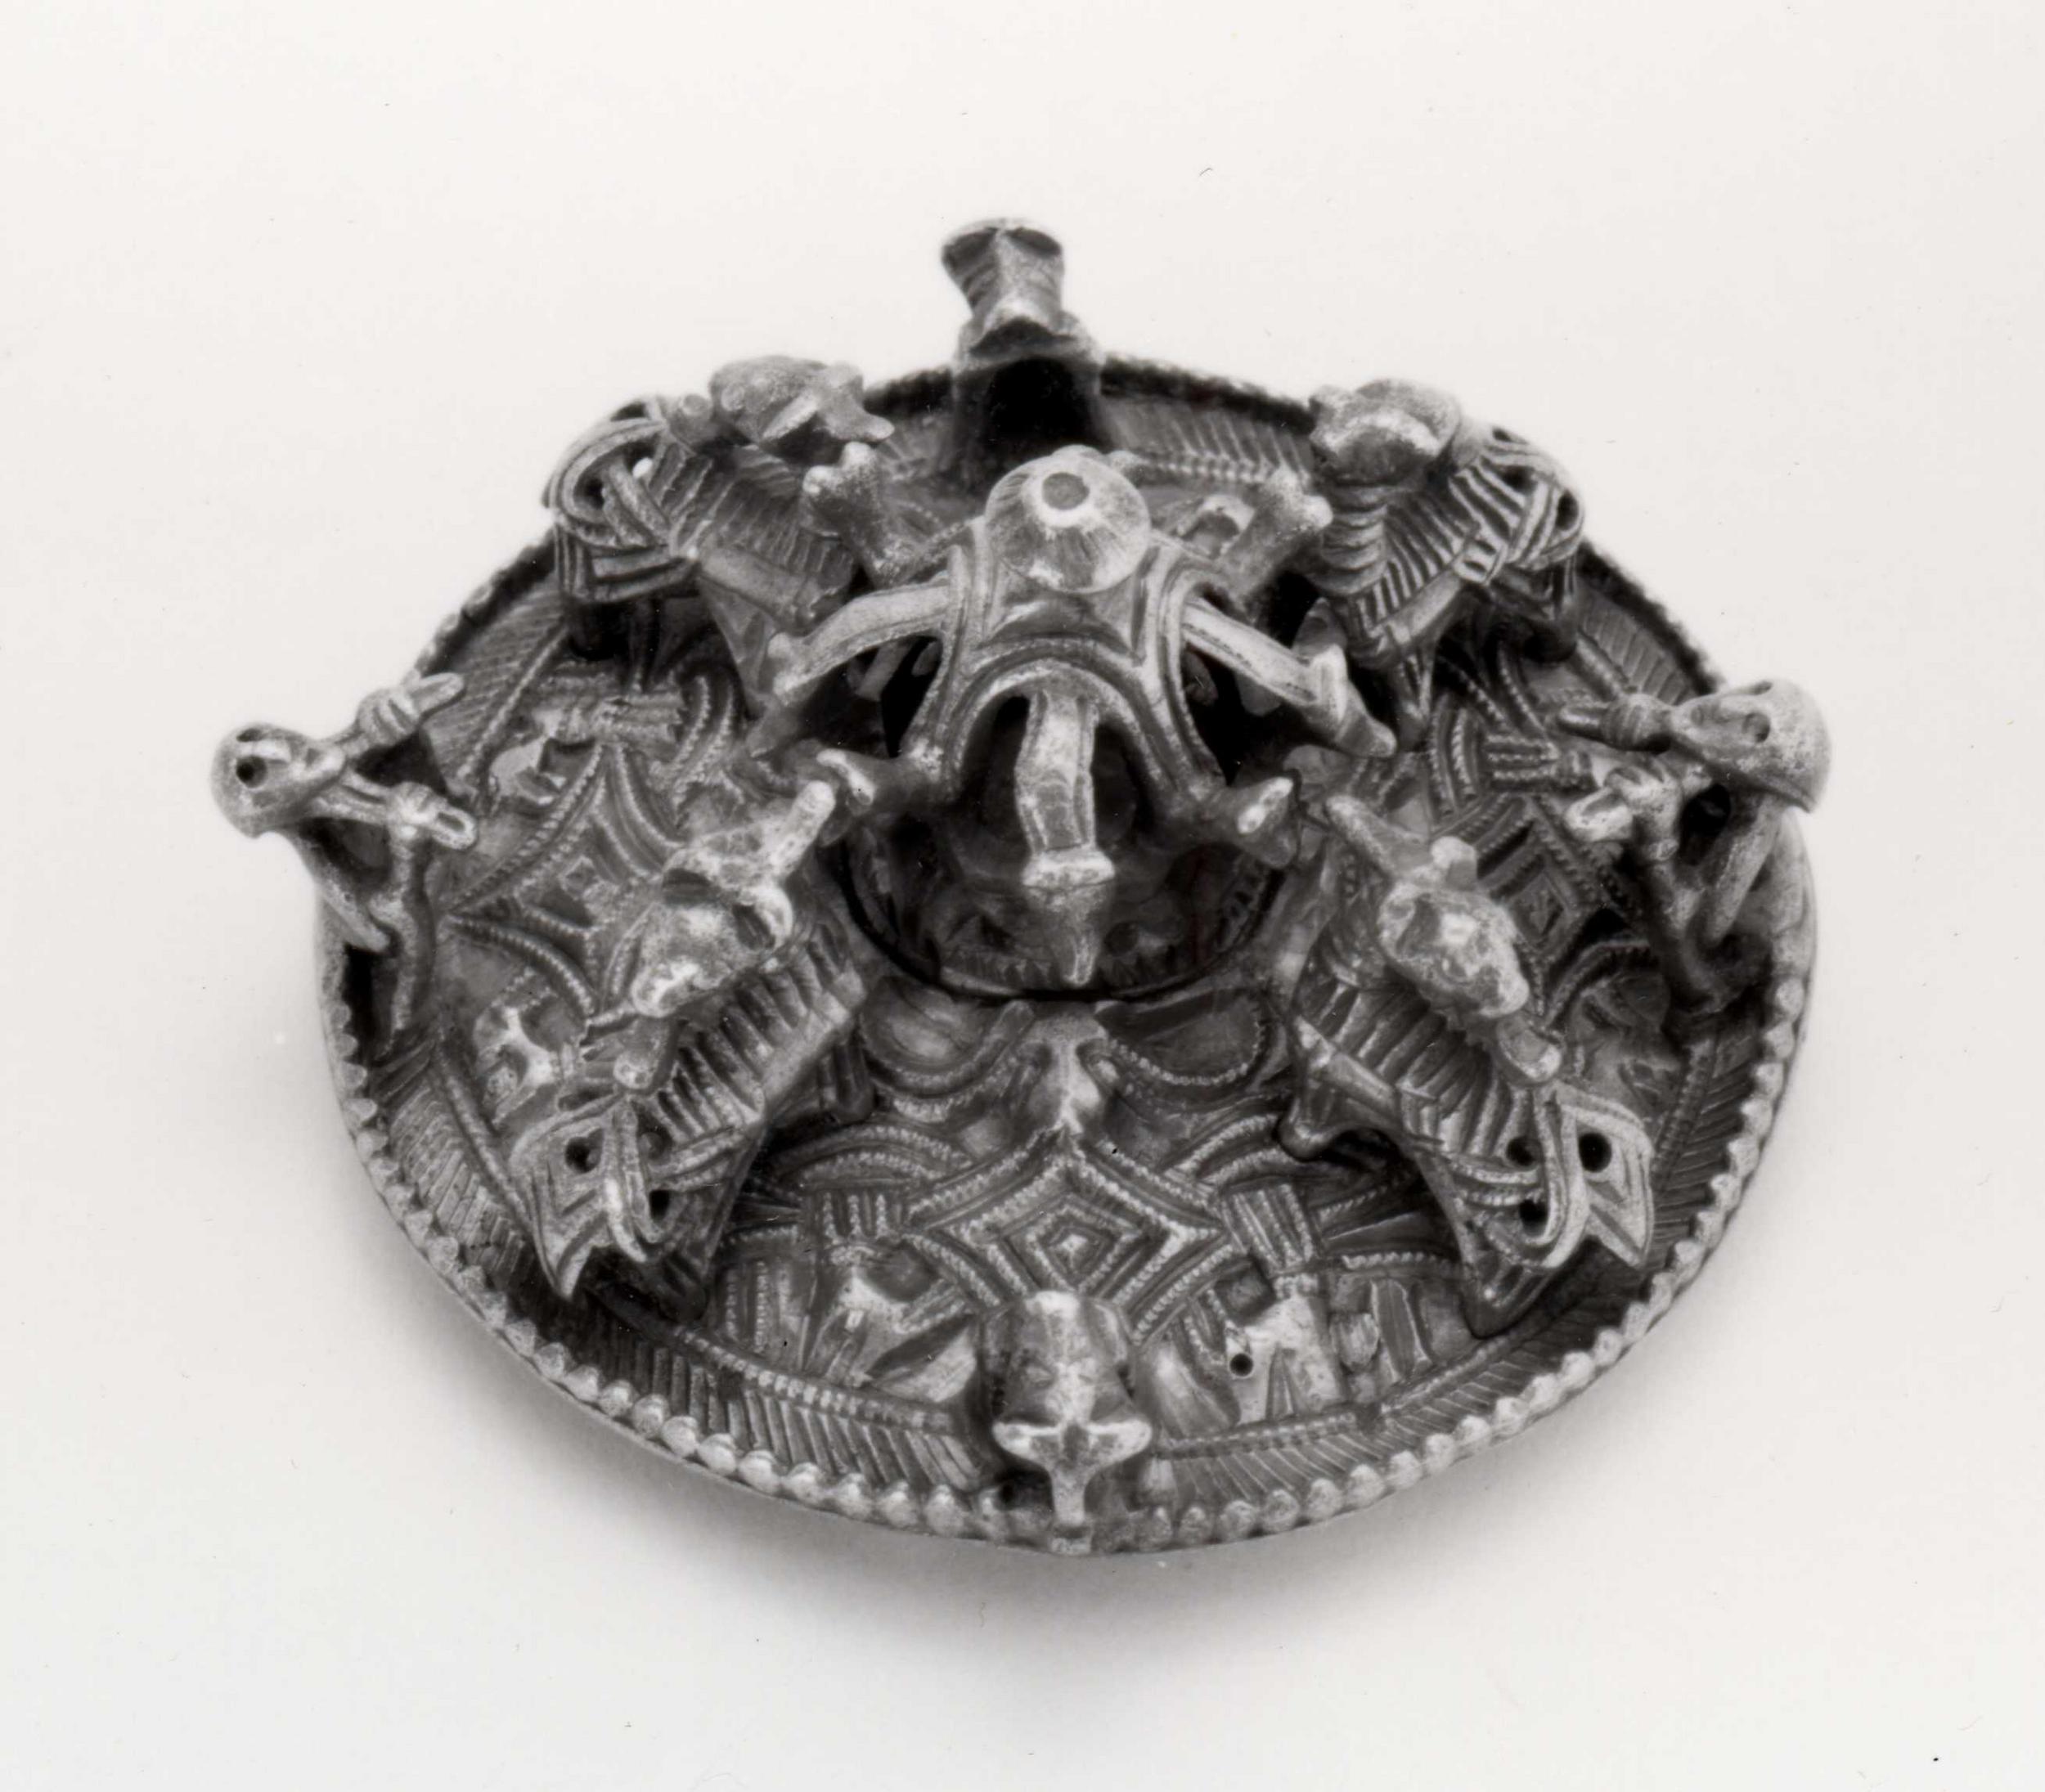 Three-dimensional Brooch. Gotland, Sweden. The British Museum, London, 1901,0718.1. Photo: © The Trustees of the British Museum CC BY-NC-SA.